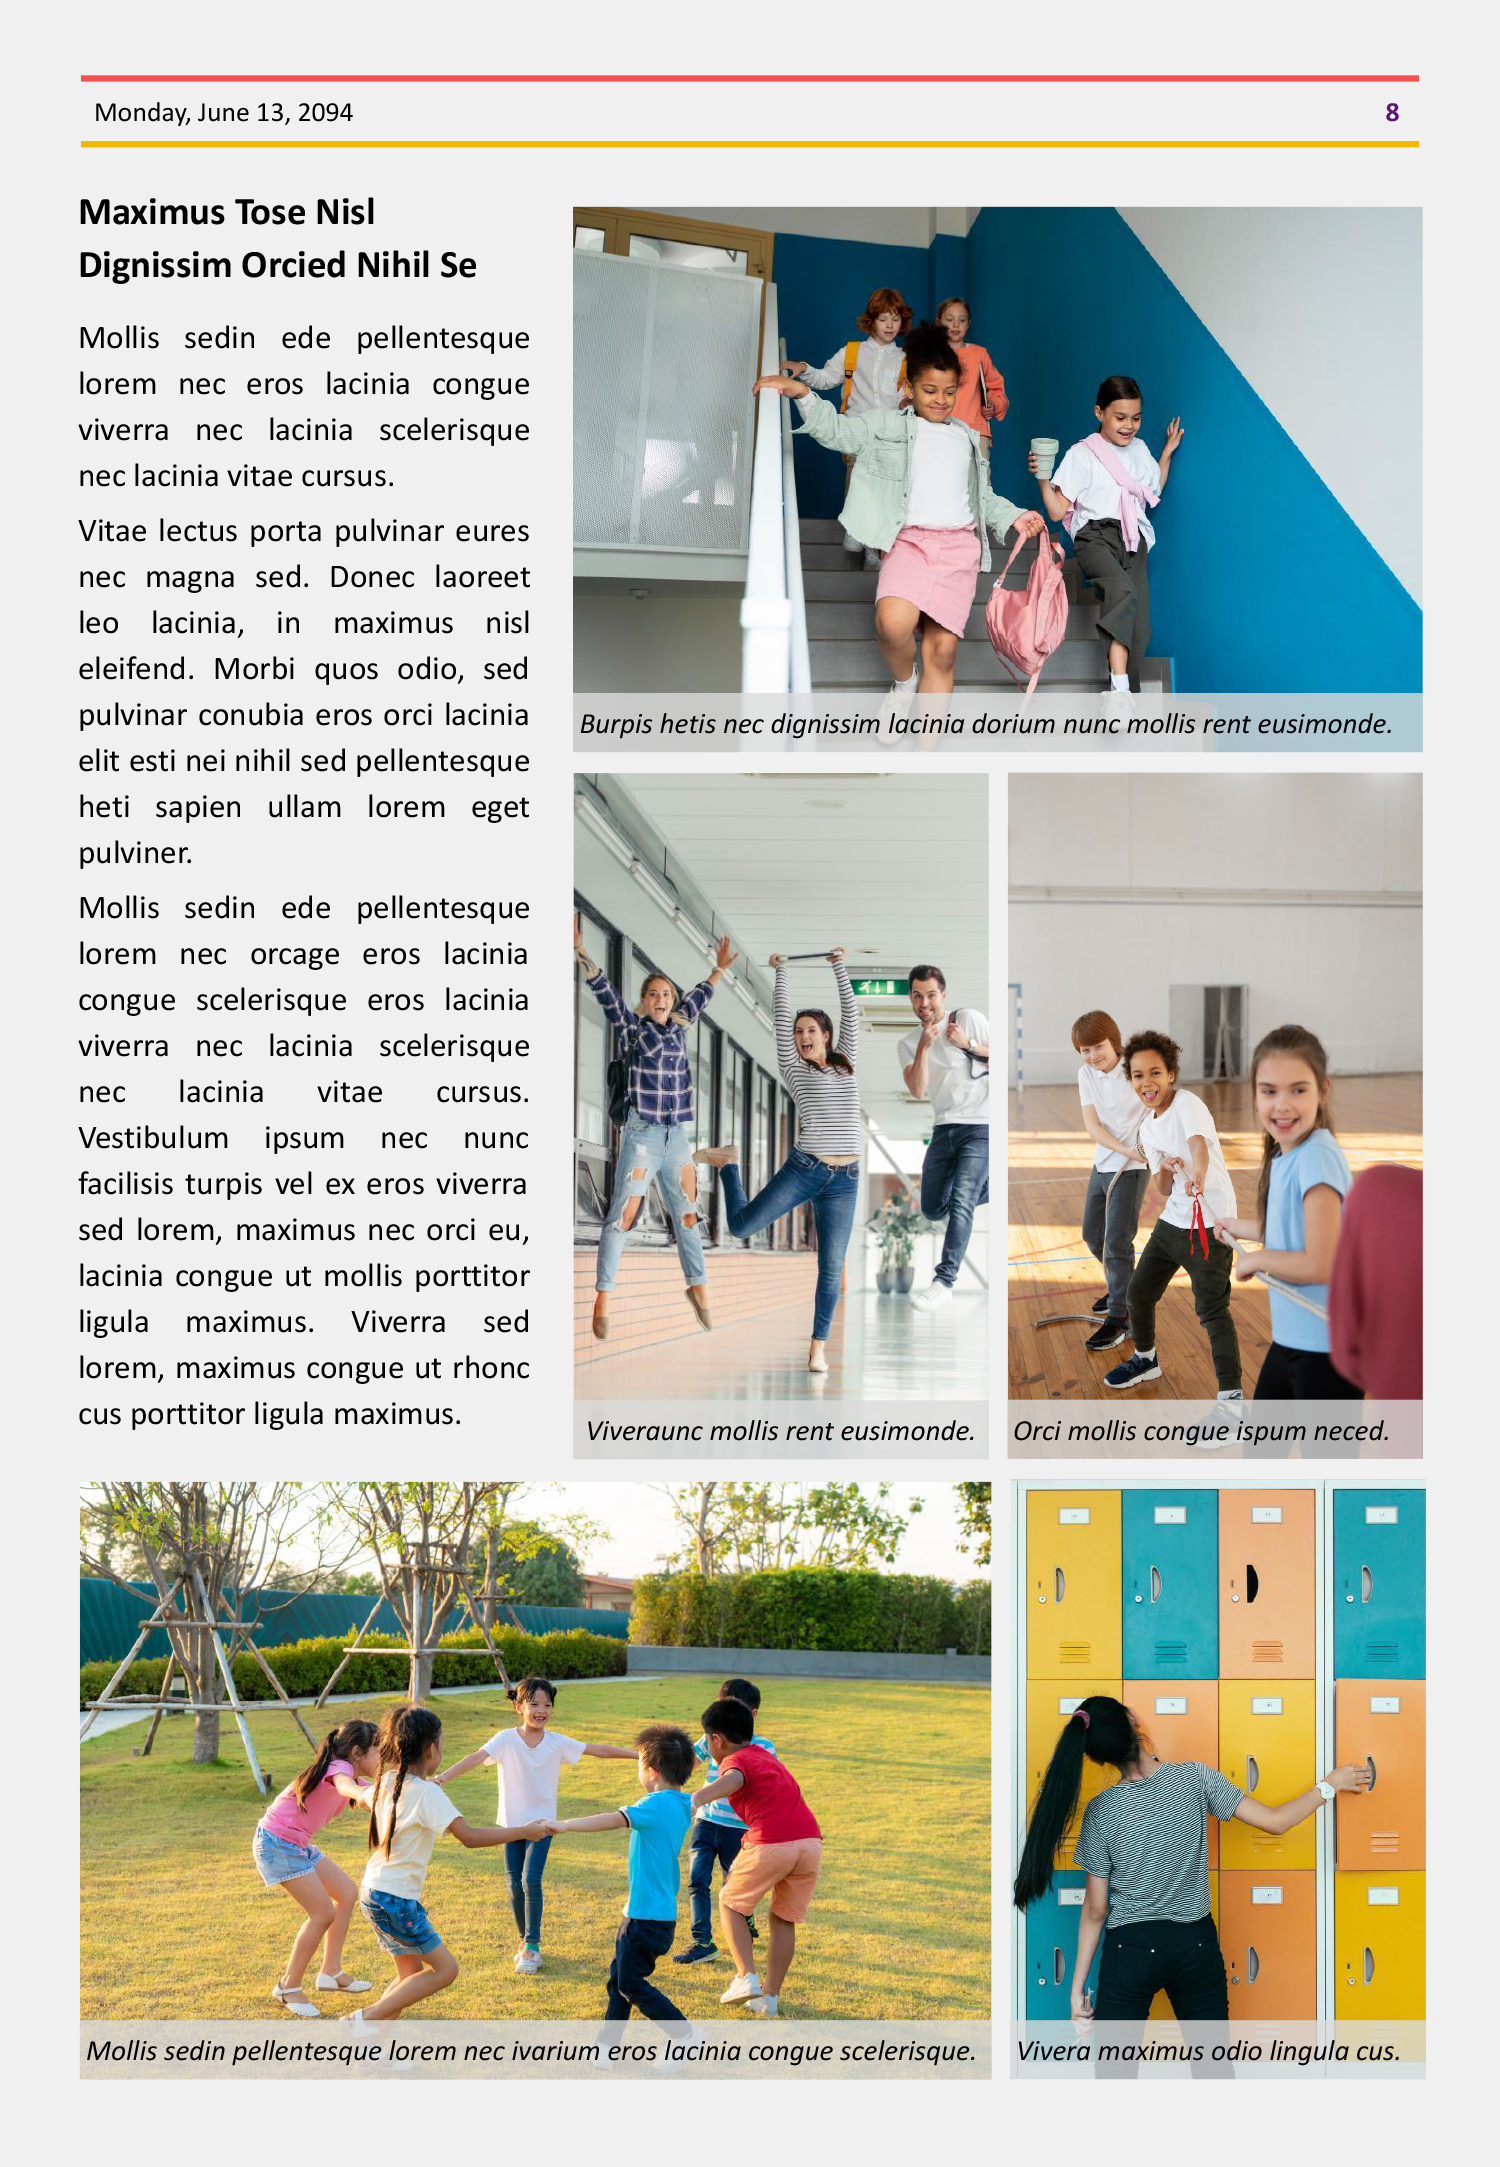 Modern 8 Pages School Newspaper Template - Page 08